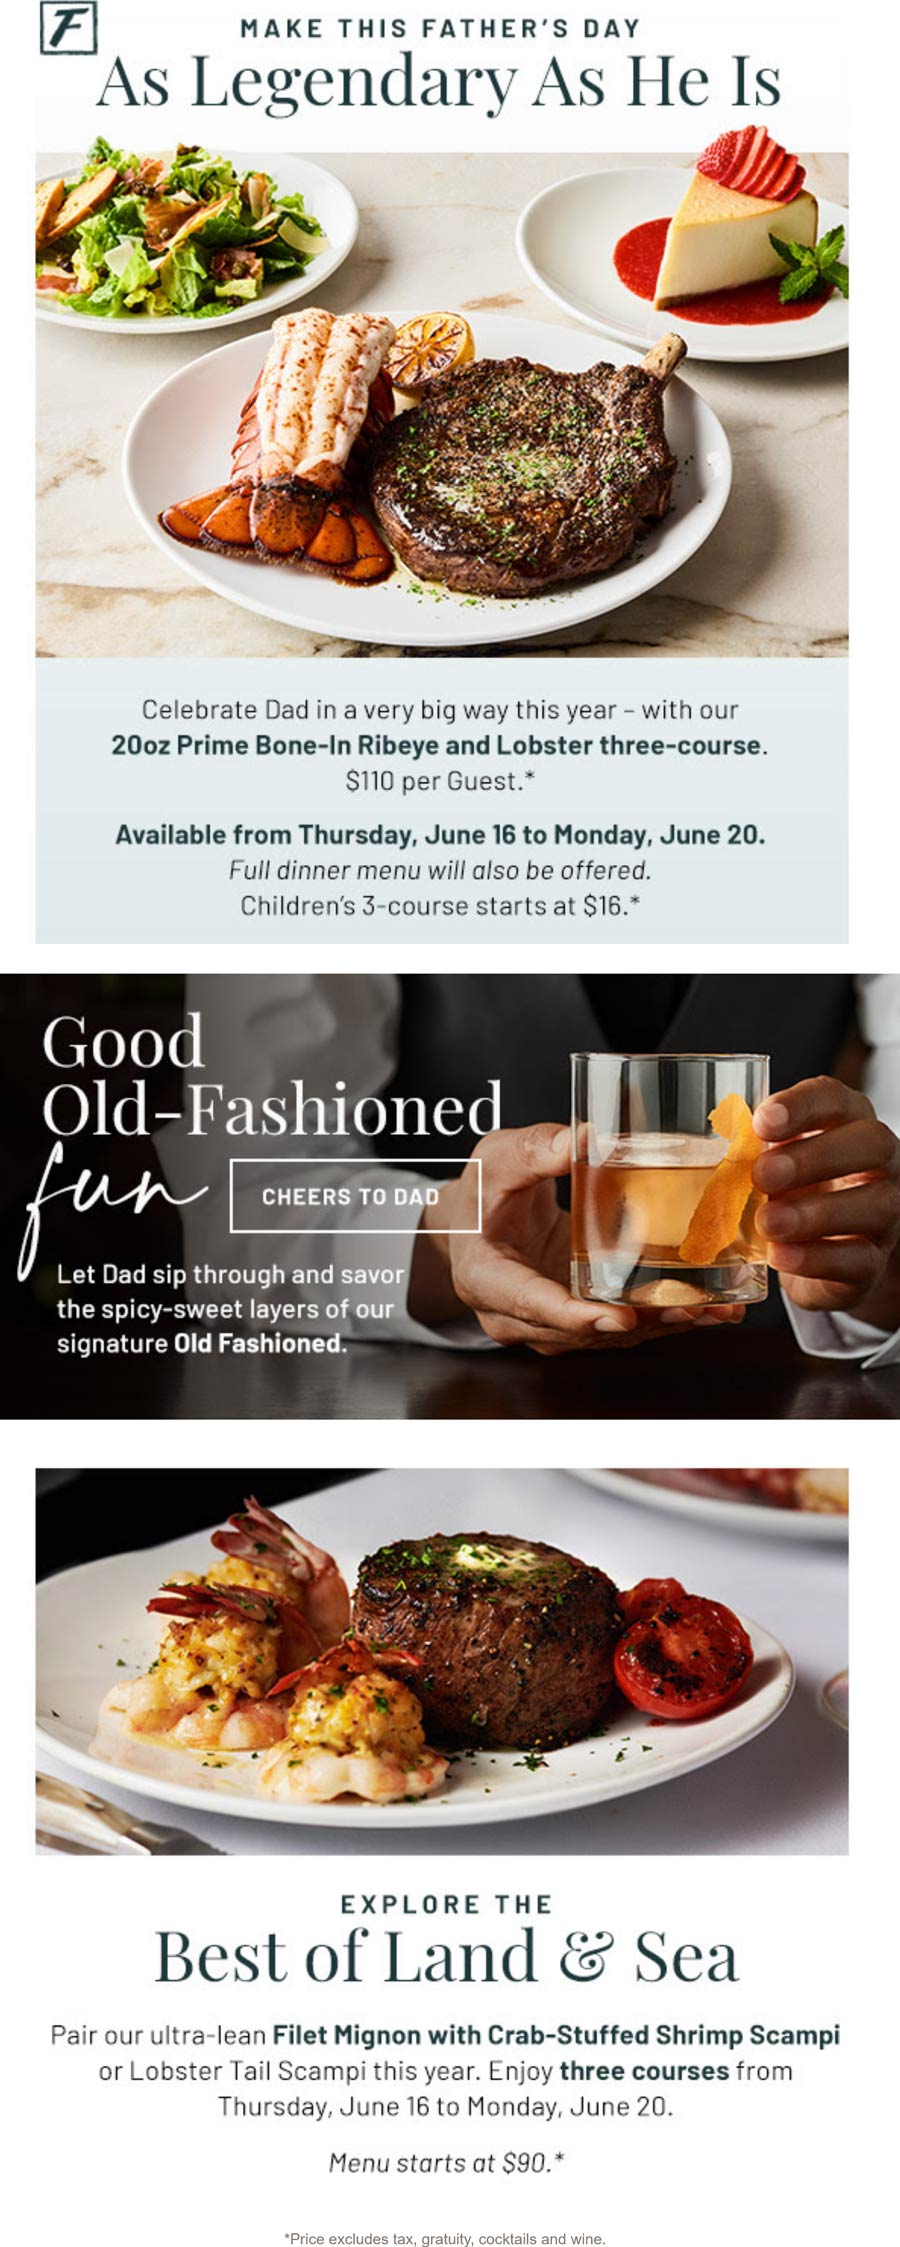 Flemings restaurants Coupon  Fathers day 20oz ribeye steak + lobster 3-course meal = $110 at Flemings steakhouse #flemings 